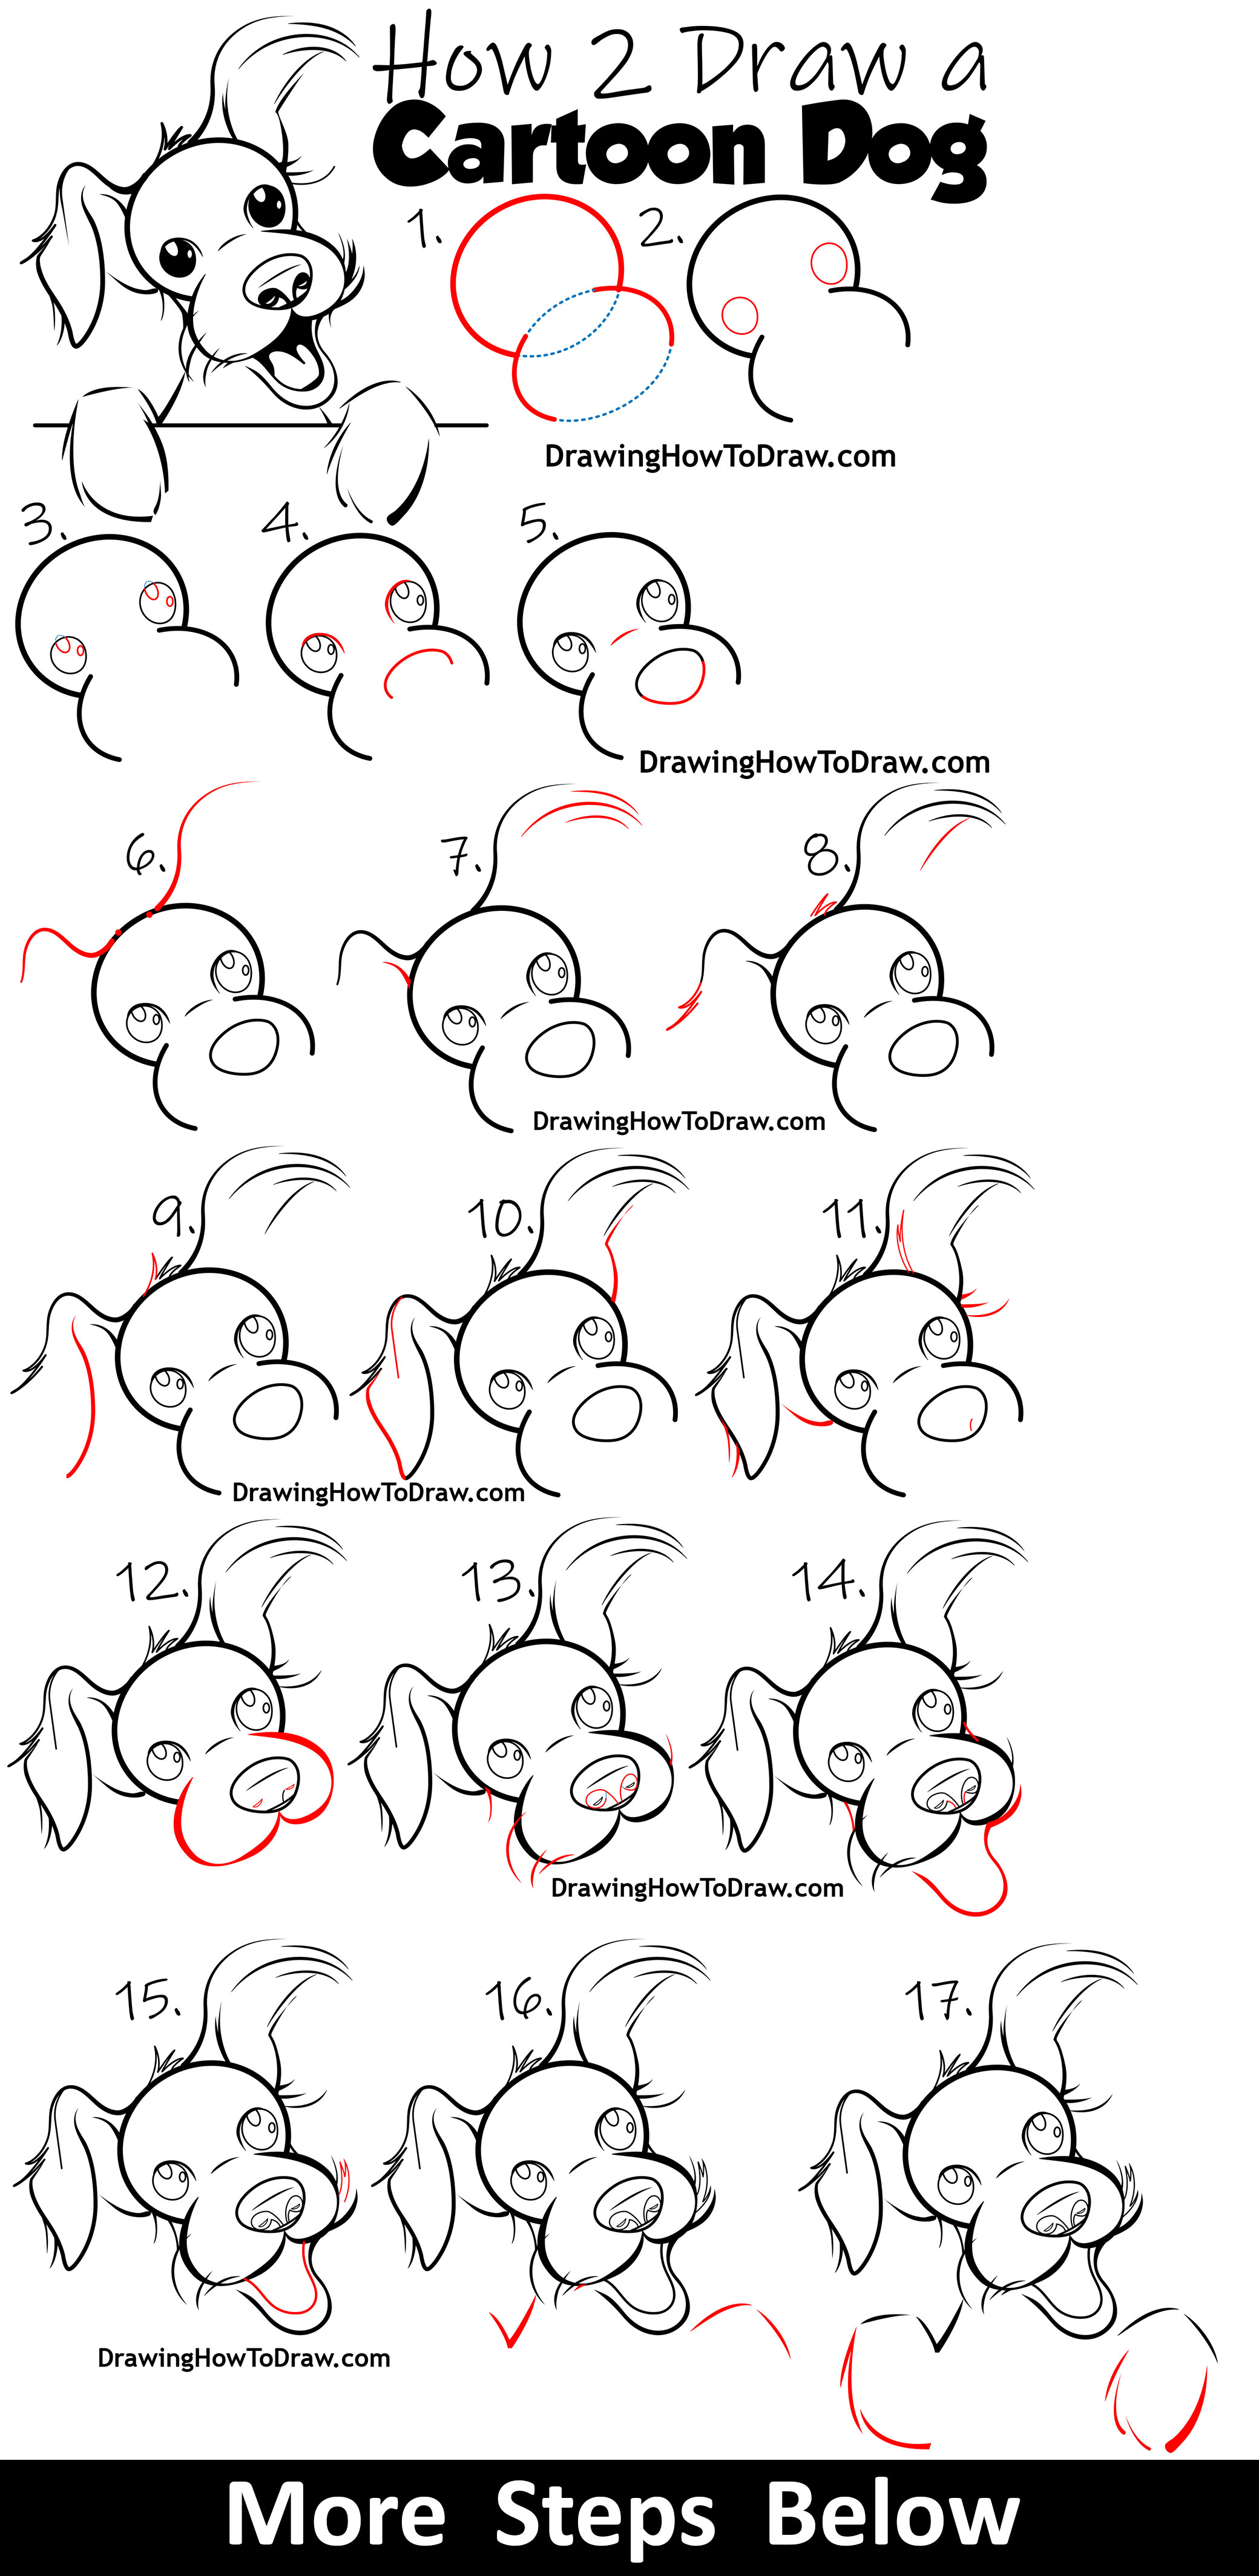 Easy step by step drawing for beginners - anidase